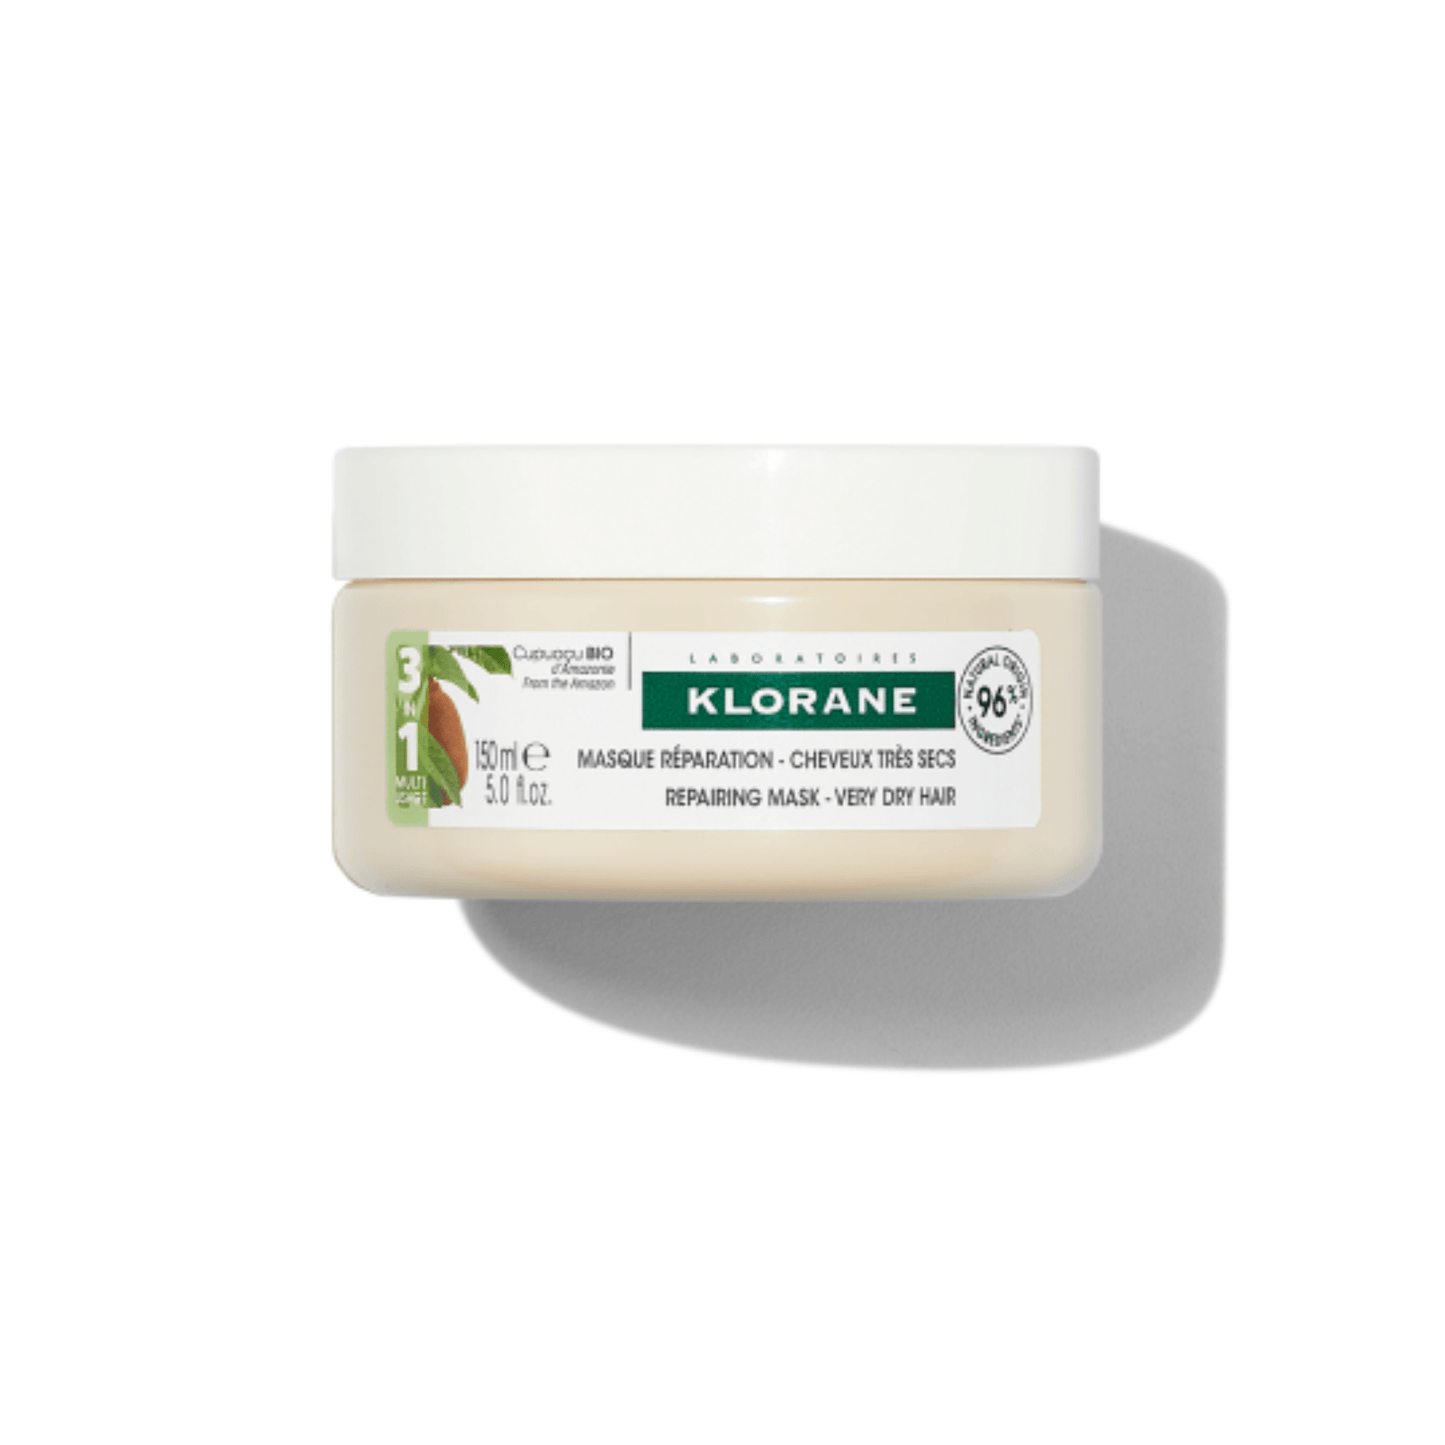 Primary Image of Nourishing & Repairing Hair Mask with Cupuacu Butter